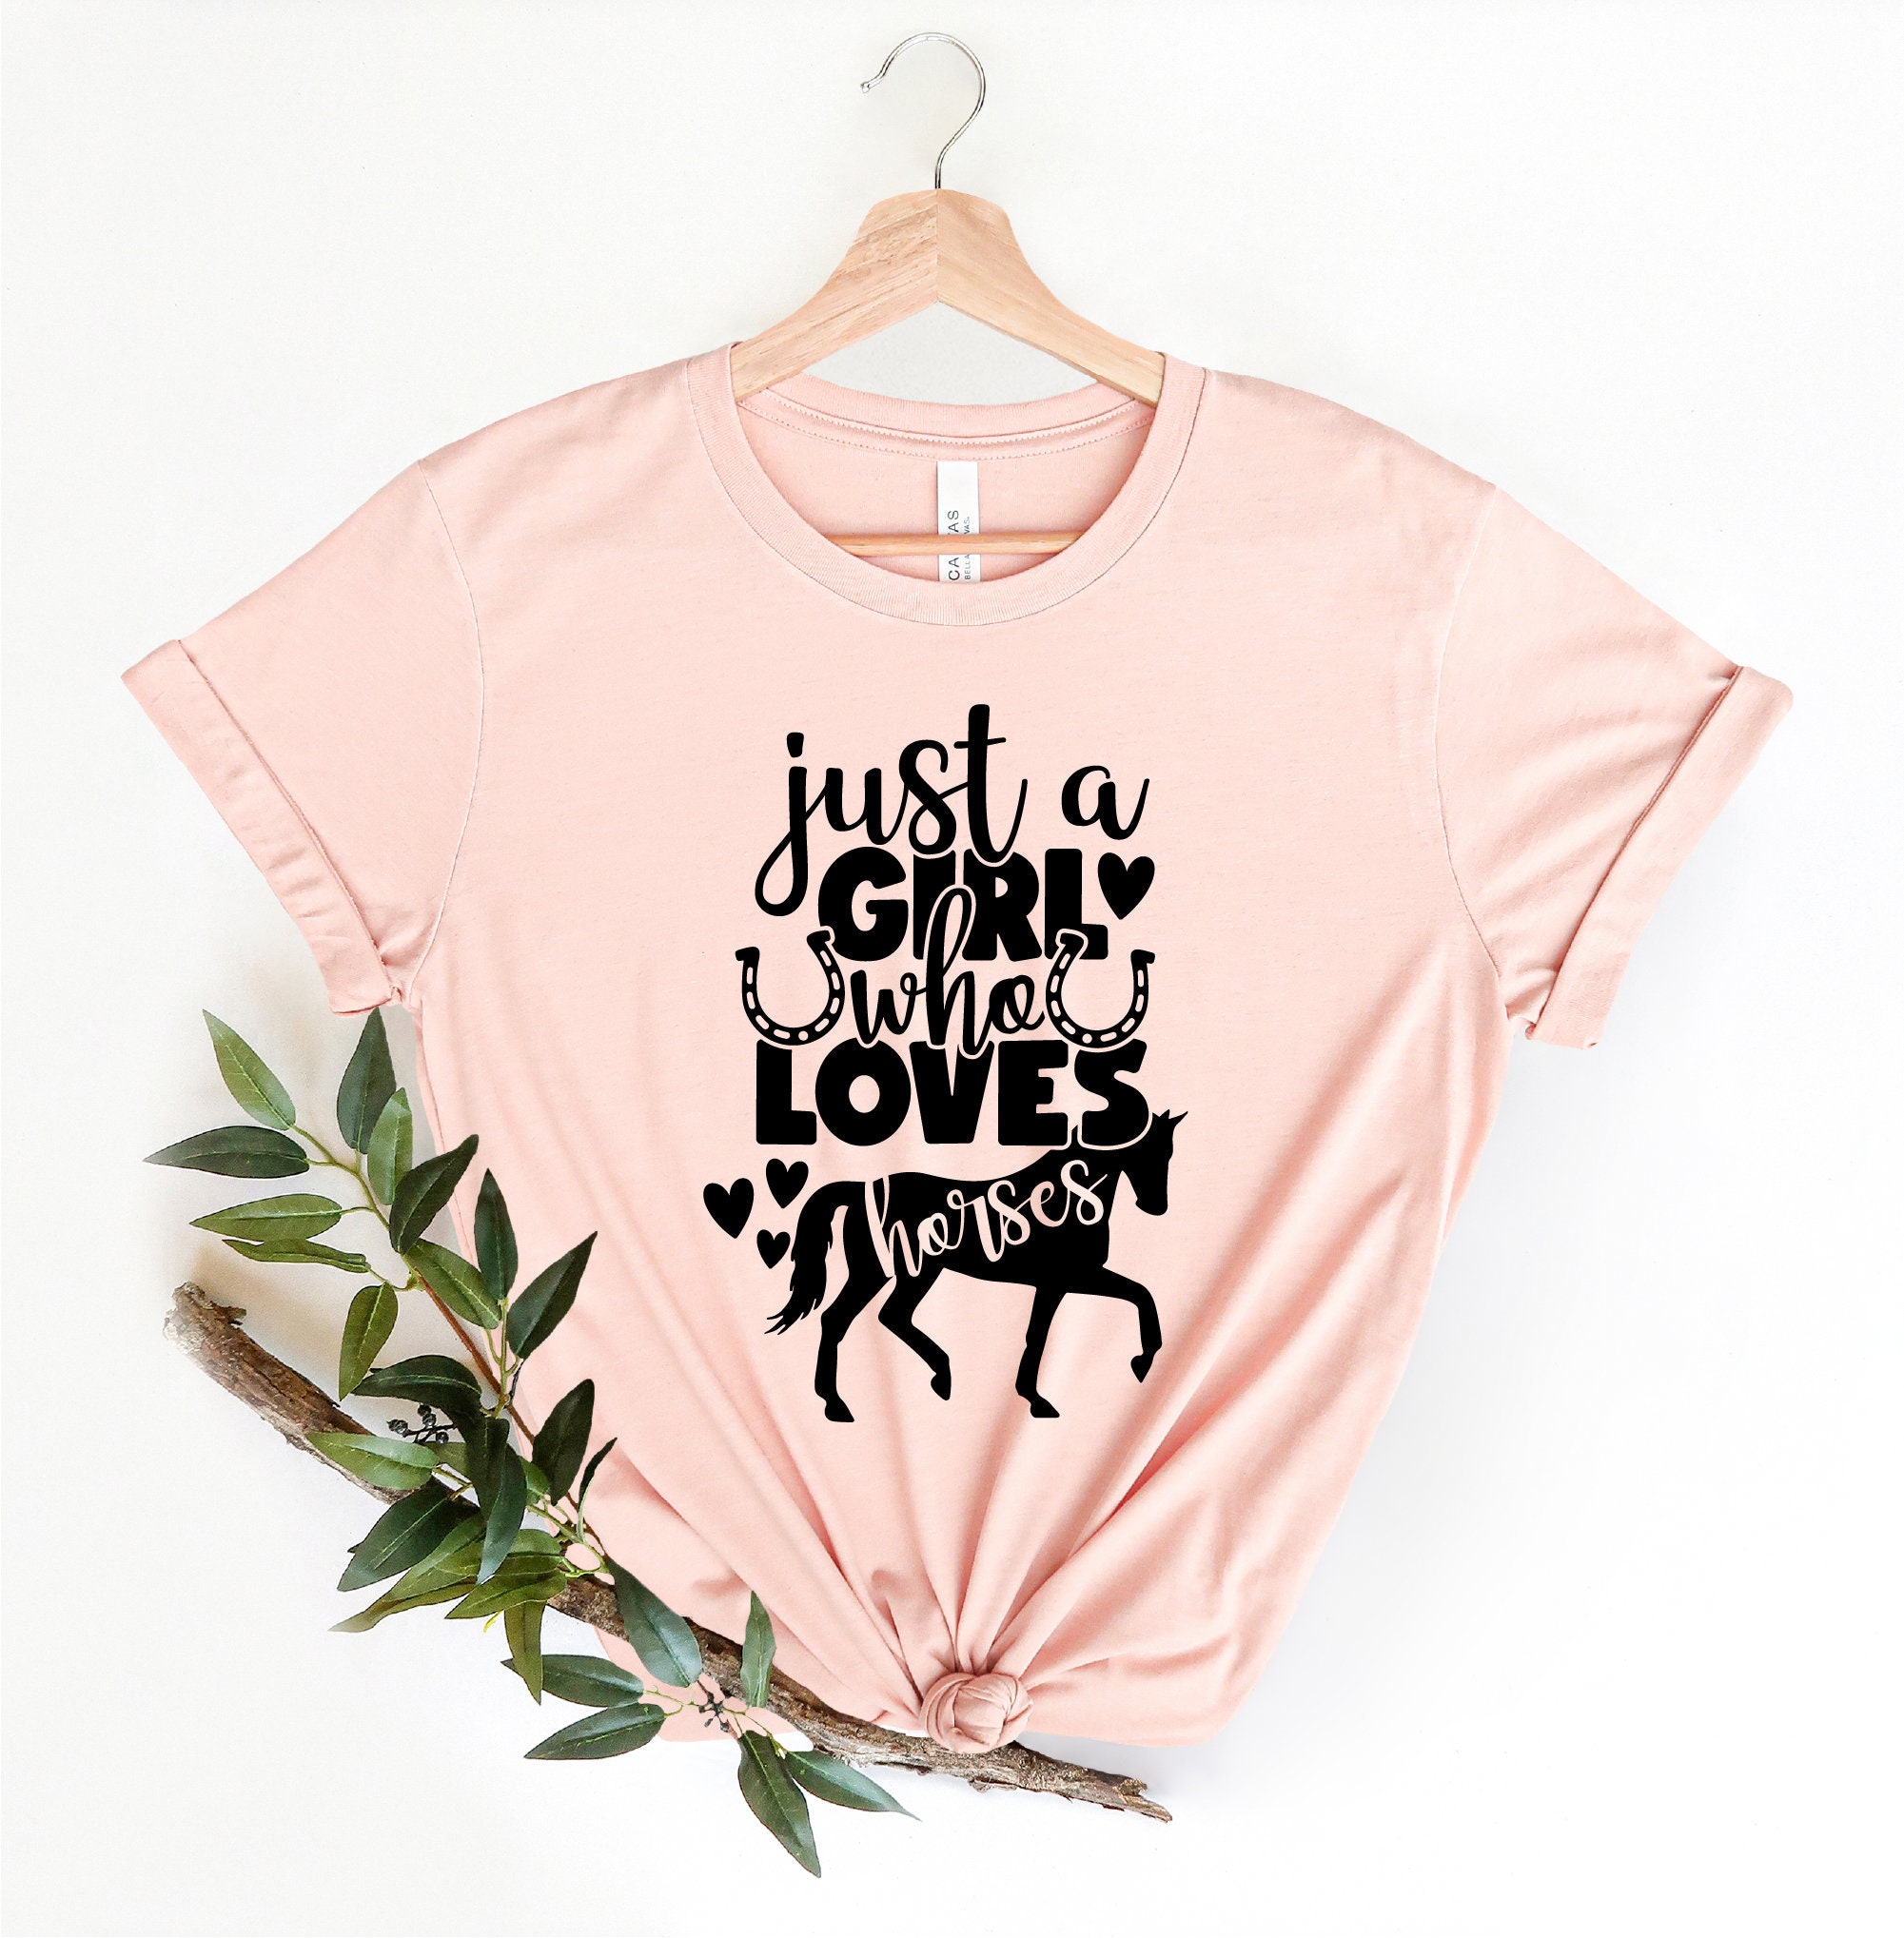 Discover Just a Girl Who Loves Horses, Horse Girl, Horse Riding, Animal Lover Shirt, Horse Shirt, Horse Lover Shirt, Cute Farm Shirt, Girl Shirt